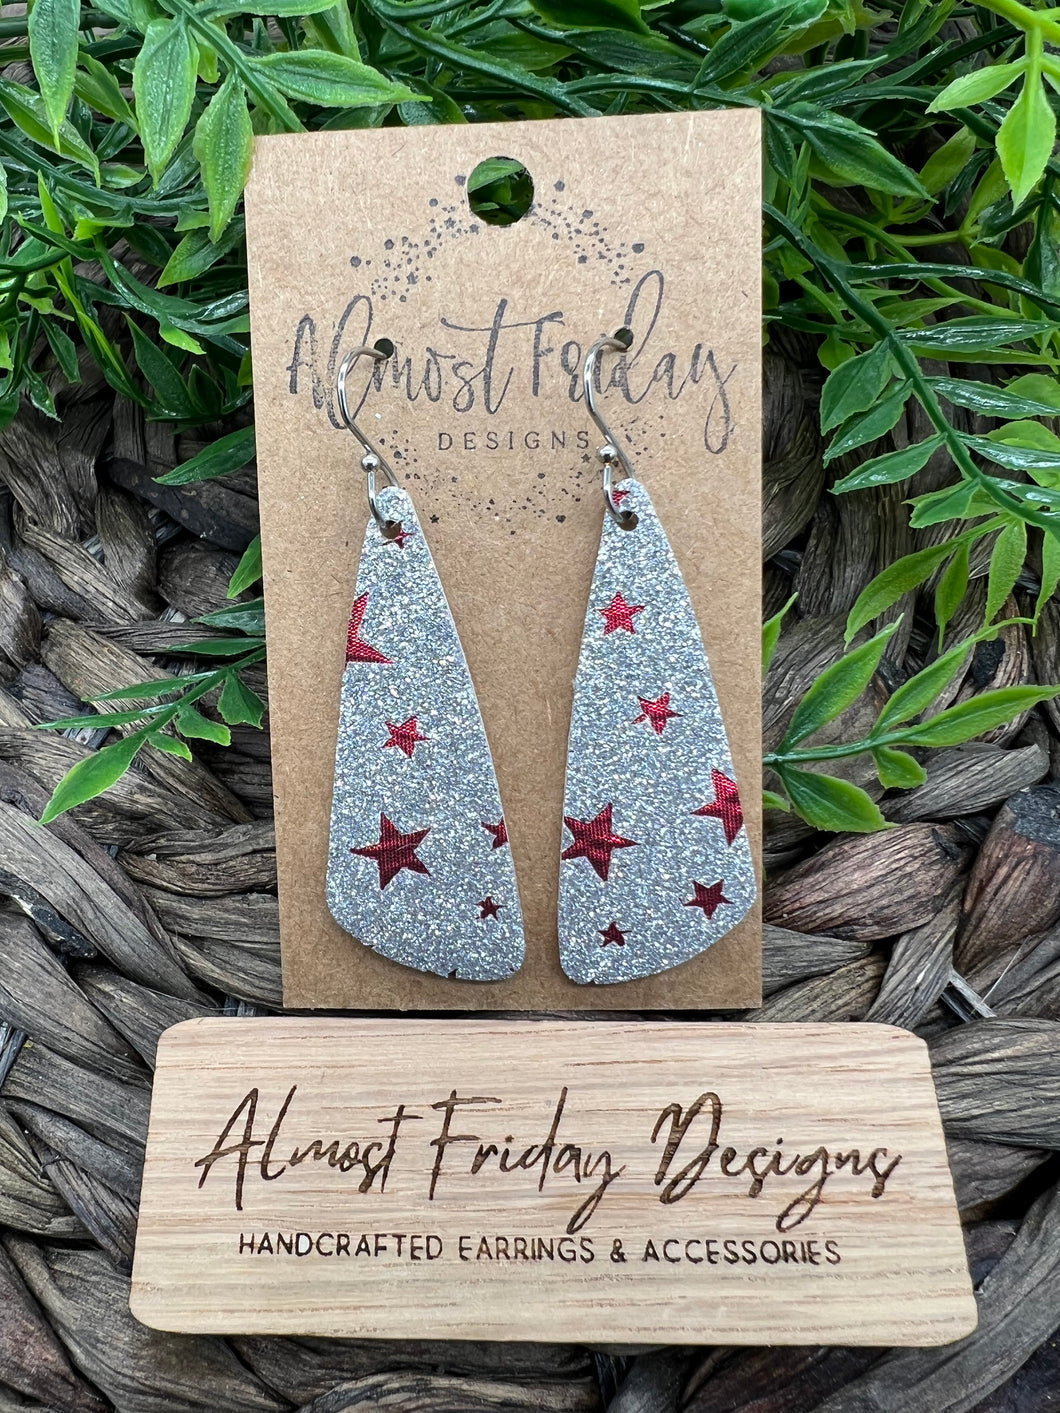 Genuine Leather Earrings - Long Triangle - Red - Metallic - Patriotic Earrings - Silver Glitter - Stars - 4th of July - Independence Day - USA - Olympics - Statement Earrings